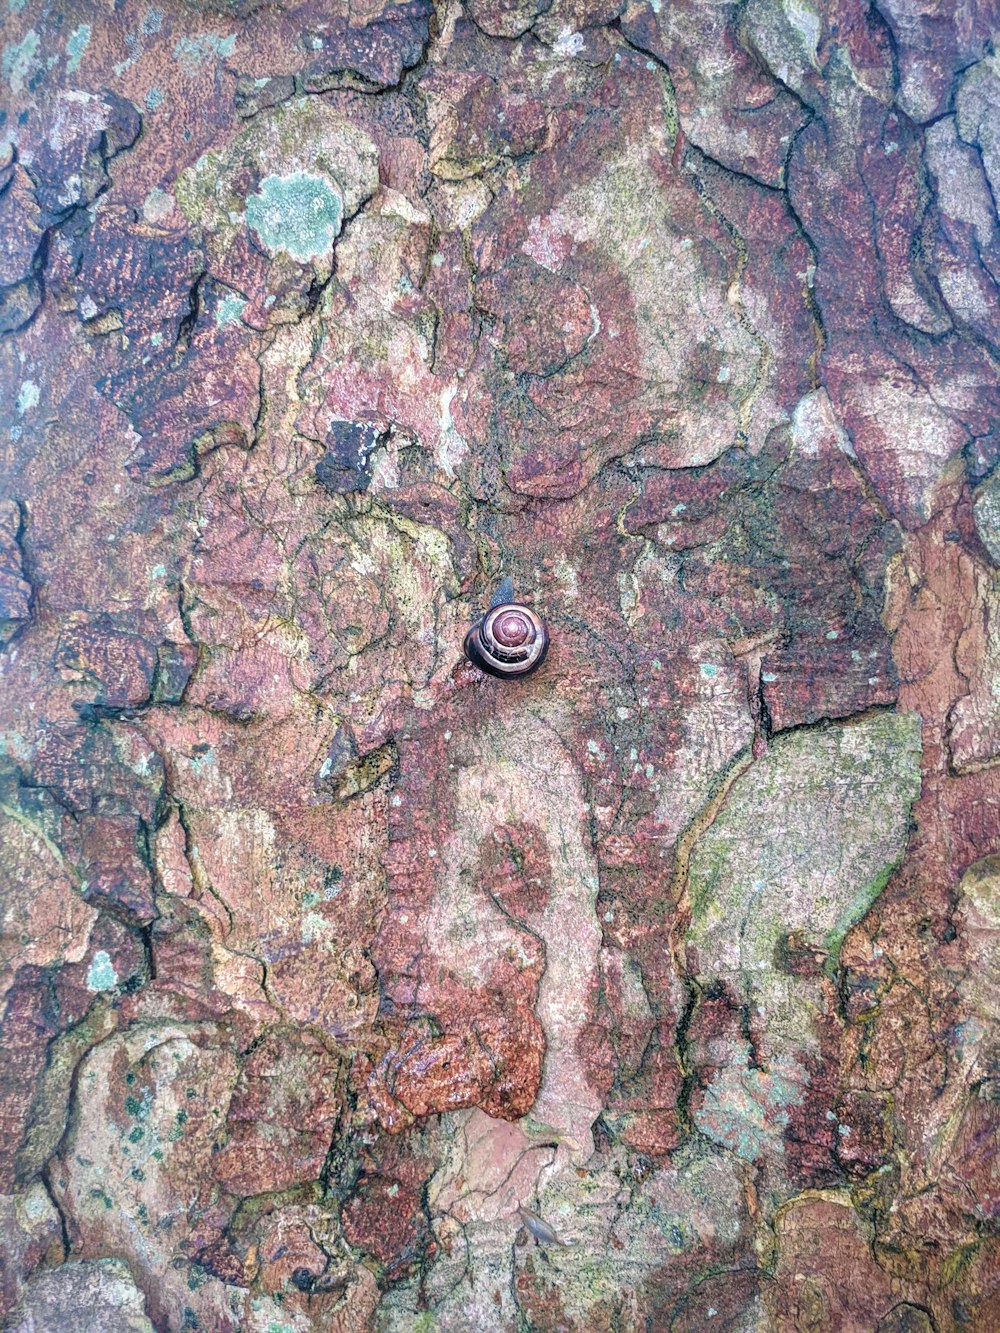 black round metal on brown and gray rock